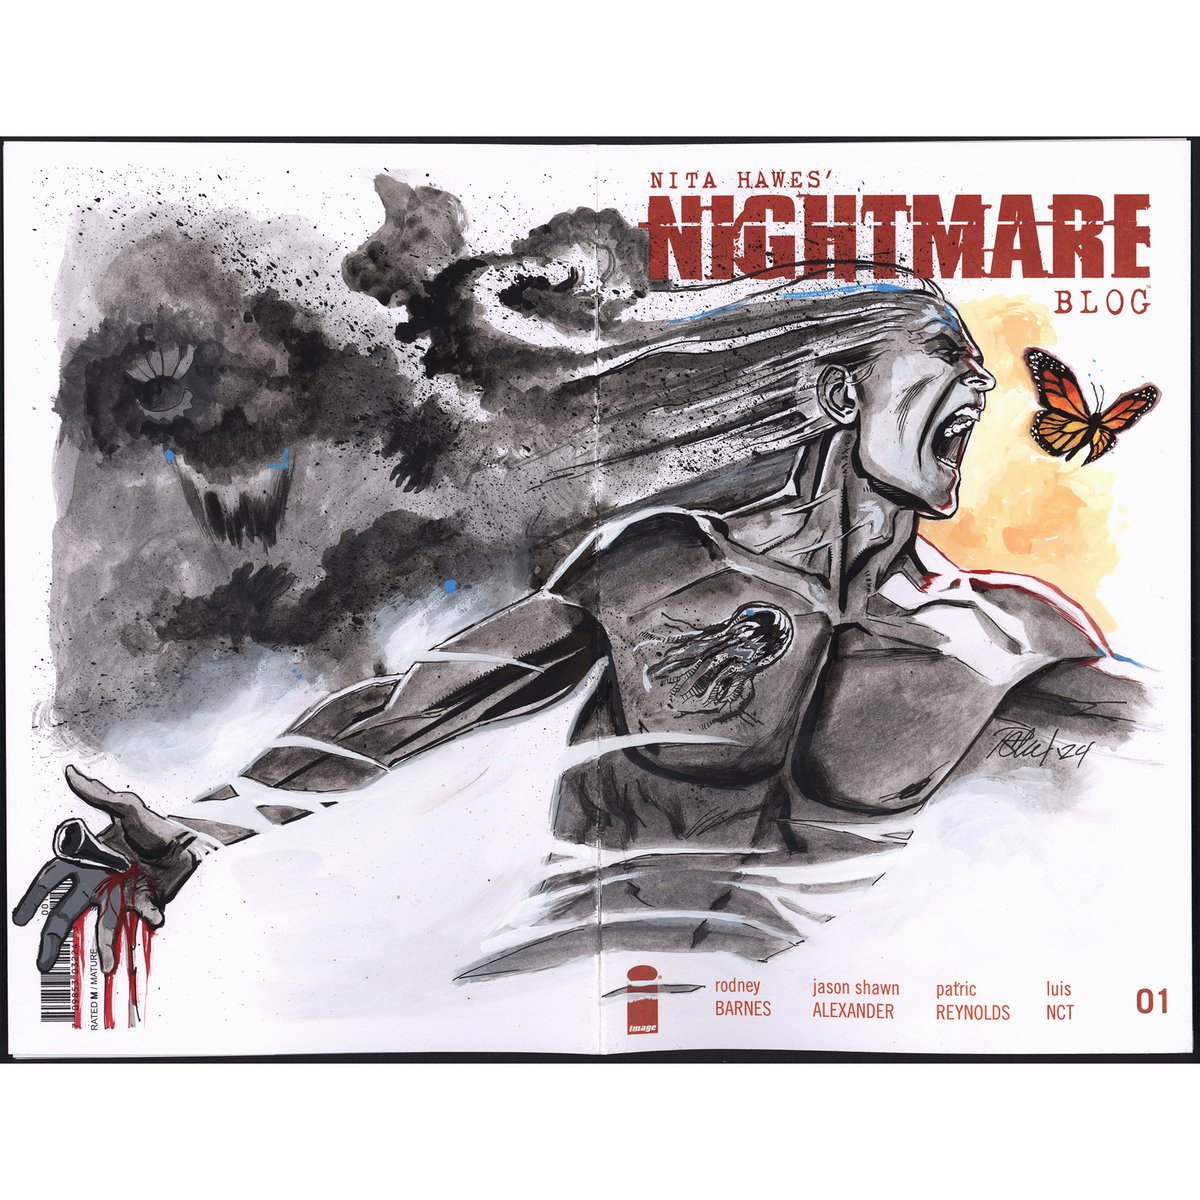 Painted sketch cover for @TheRodneyBarnes & @jasonshawnalex Nita Hawes Nightmare Blog. I did the whole image just for an excuse to paint the butterfly.
#drawing #sketch #sketchbook #comicart #comics #comicbooks #traditionalart #analogart #mixedmedia #painting #paintedsketch